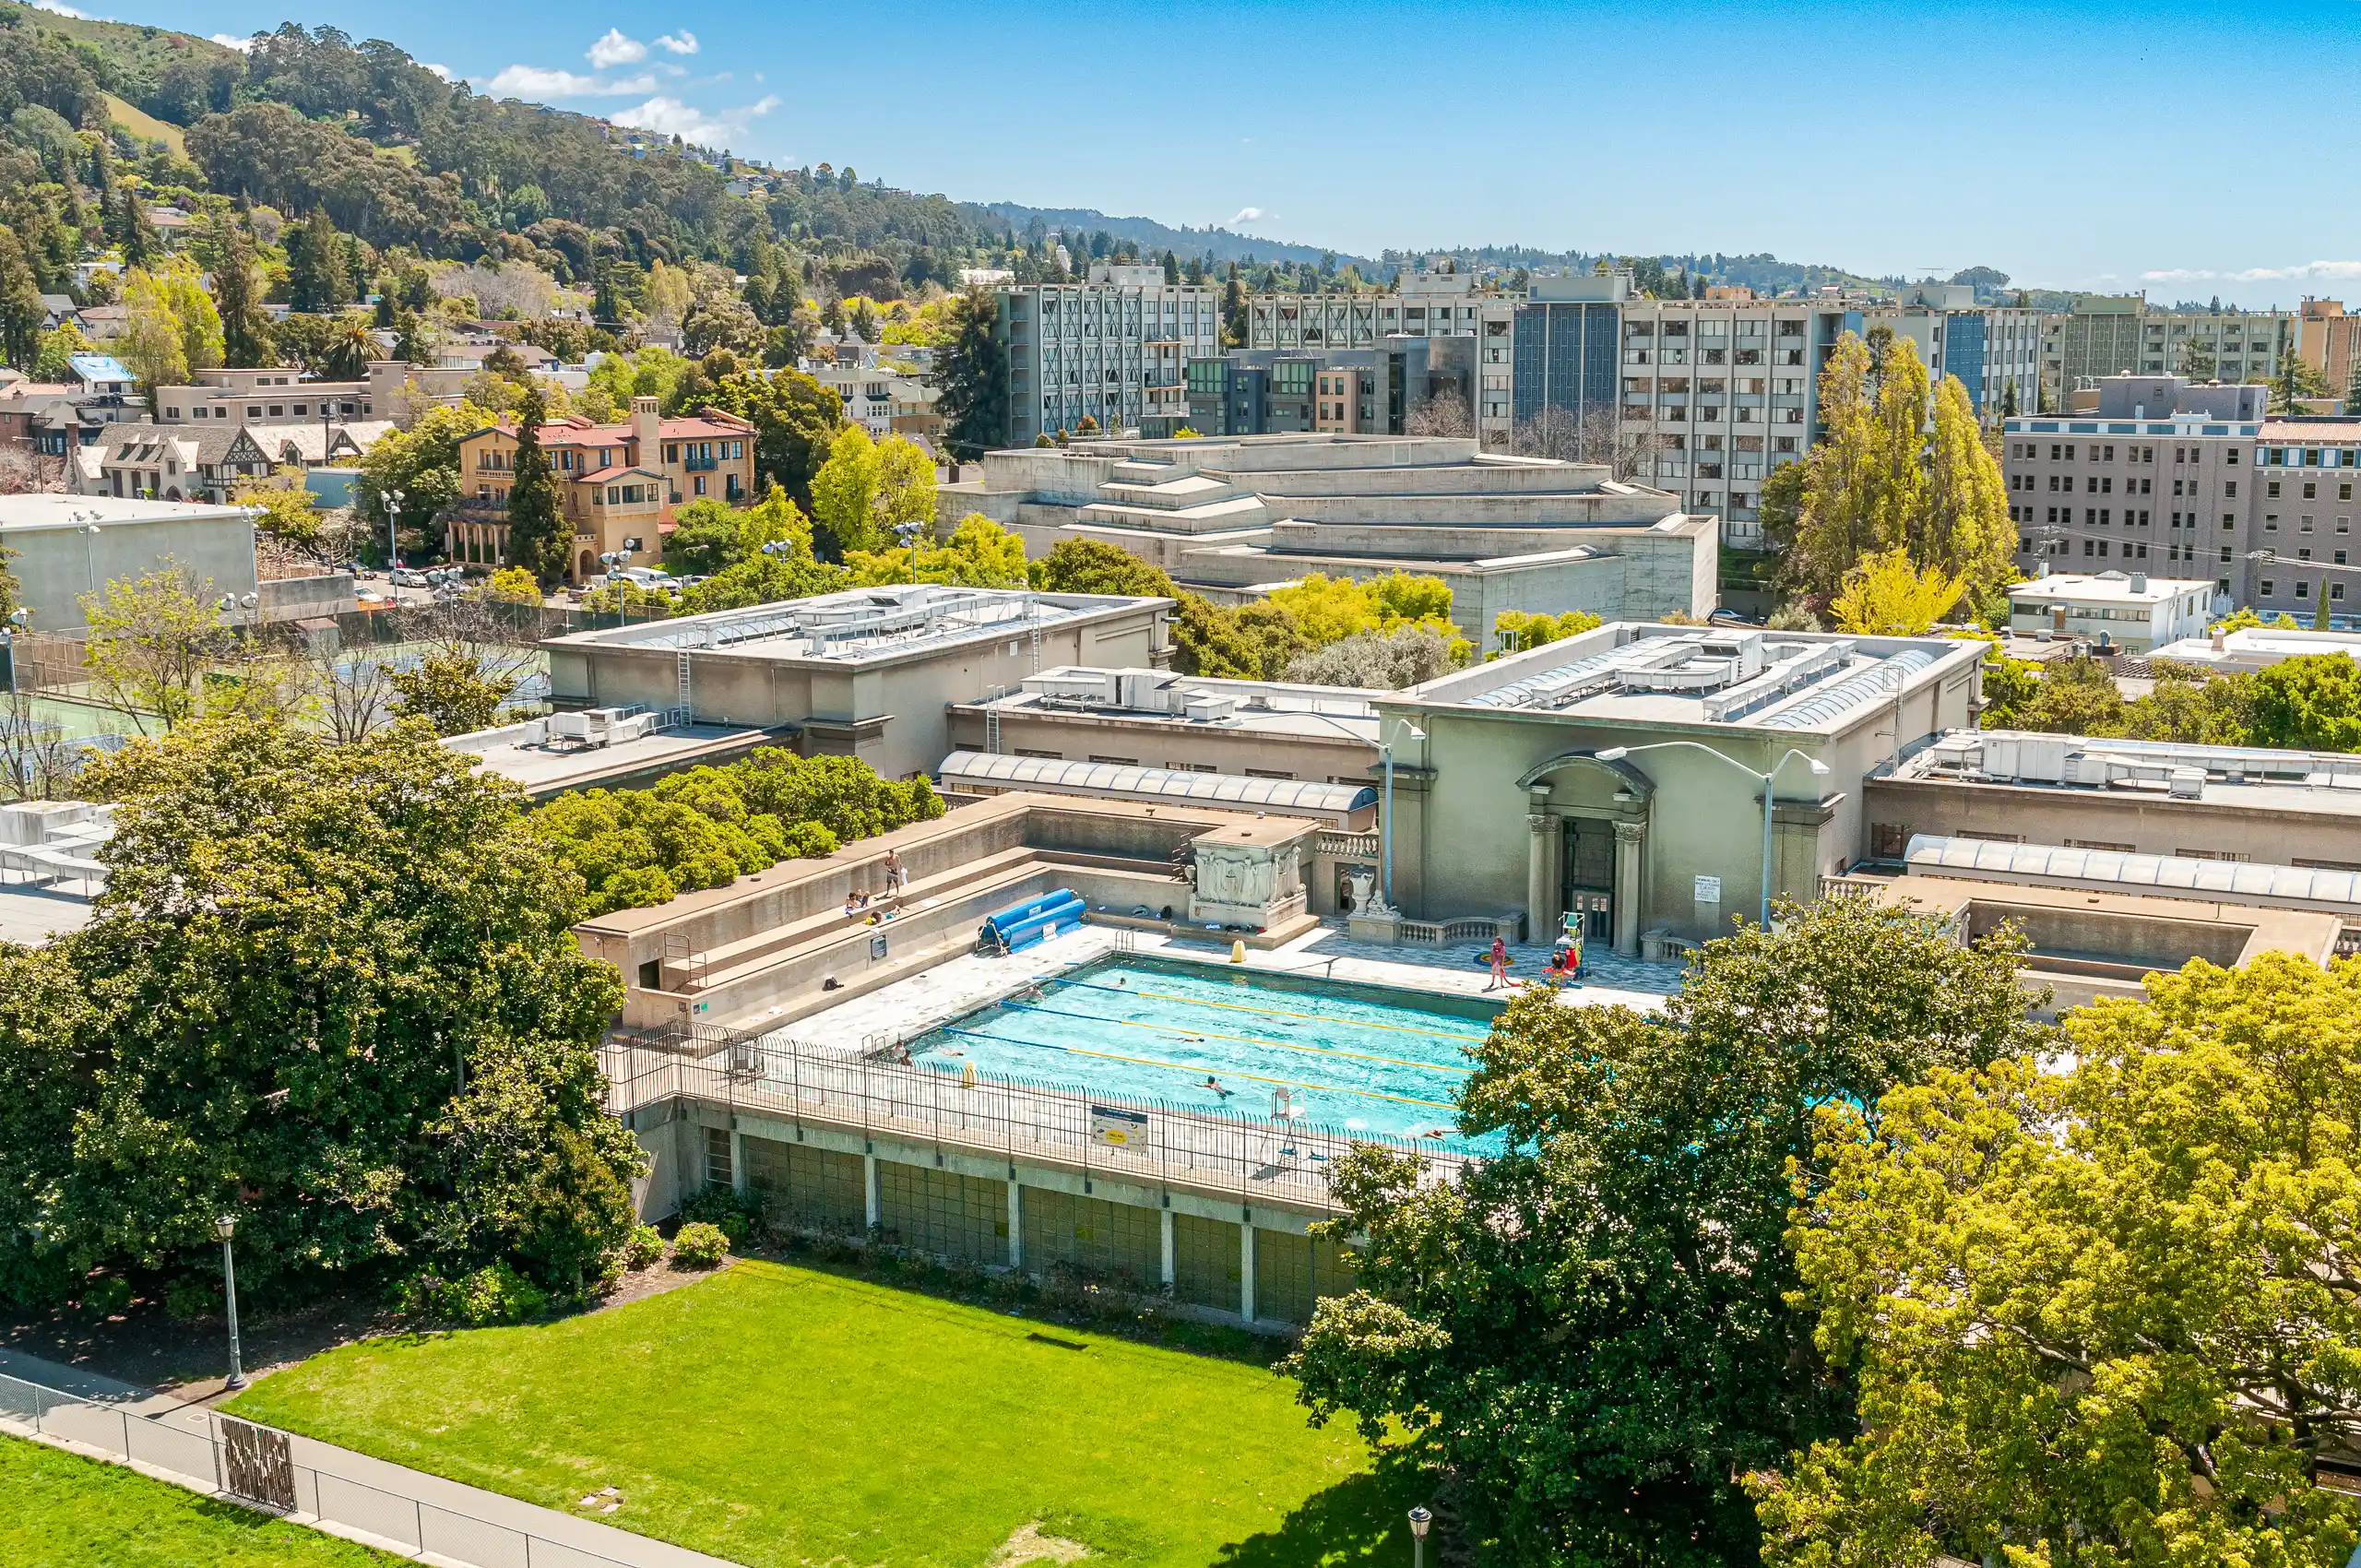 Hearst Gym & Pool with high-rise dorms in the background, 2012